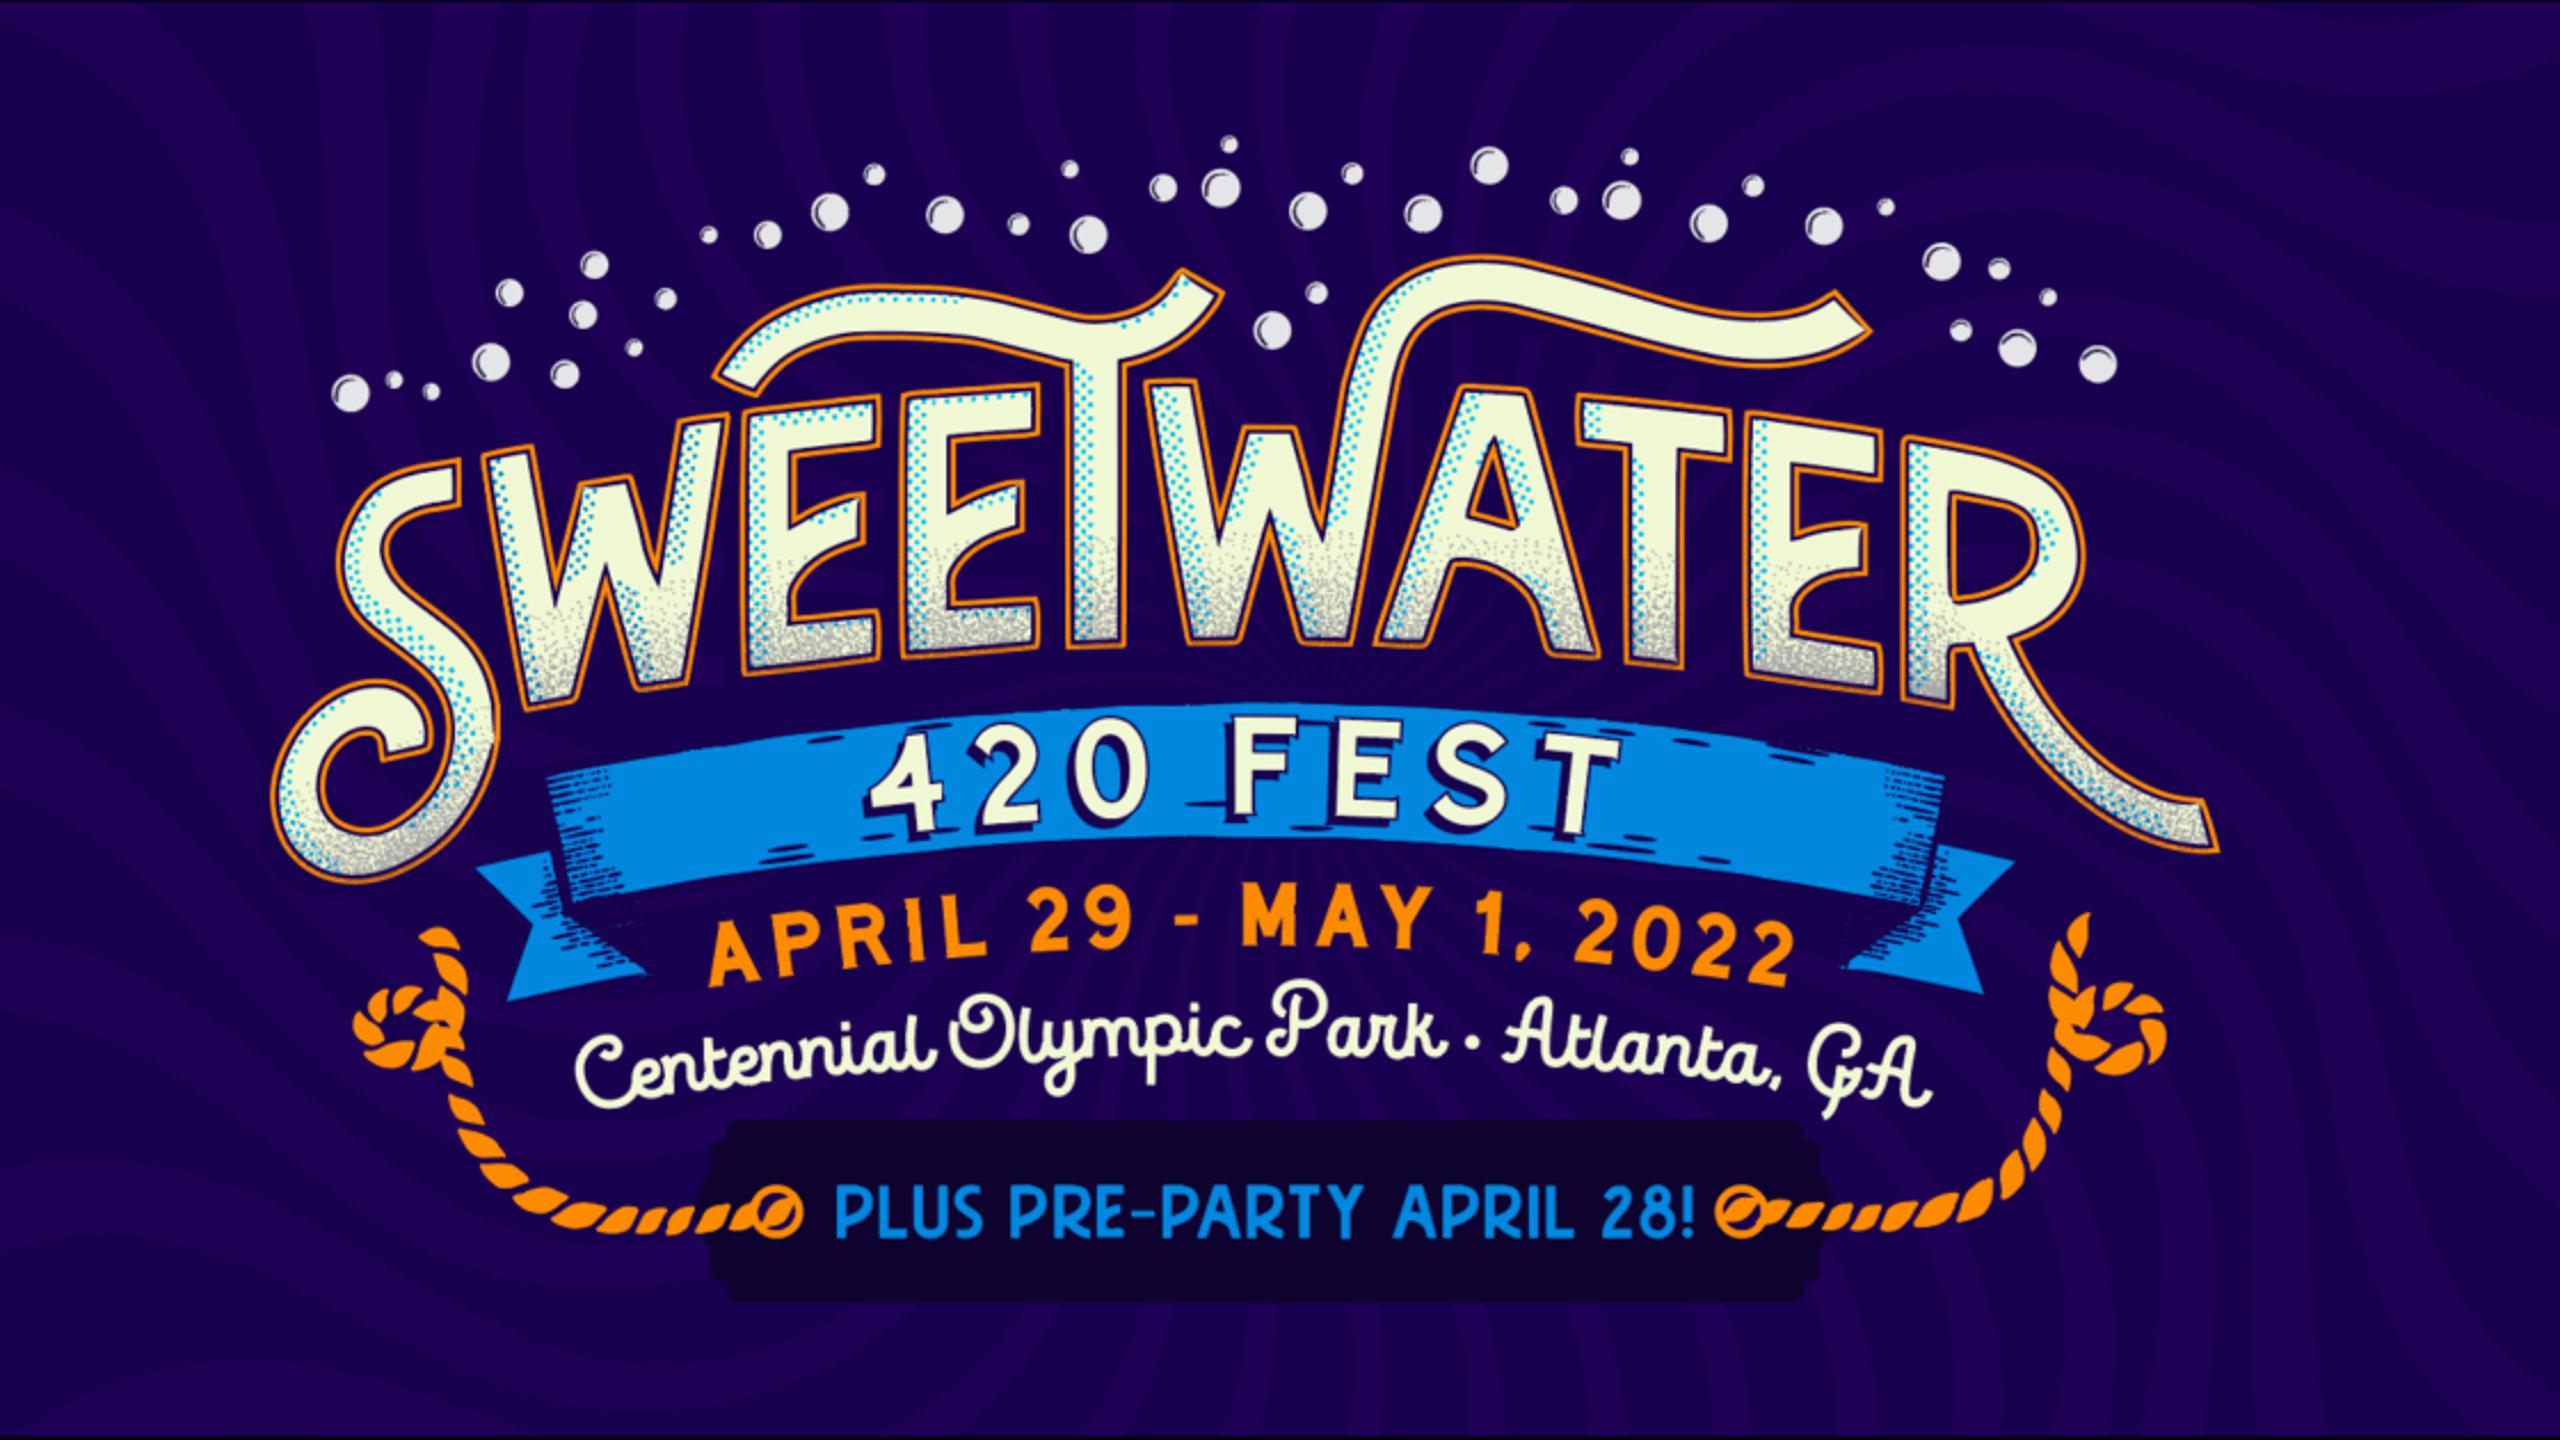 SweetWater 420 Fest 2022. Tickets, lineup, bands for SweetWater 420 Fest 2022 | Wegow United States